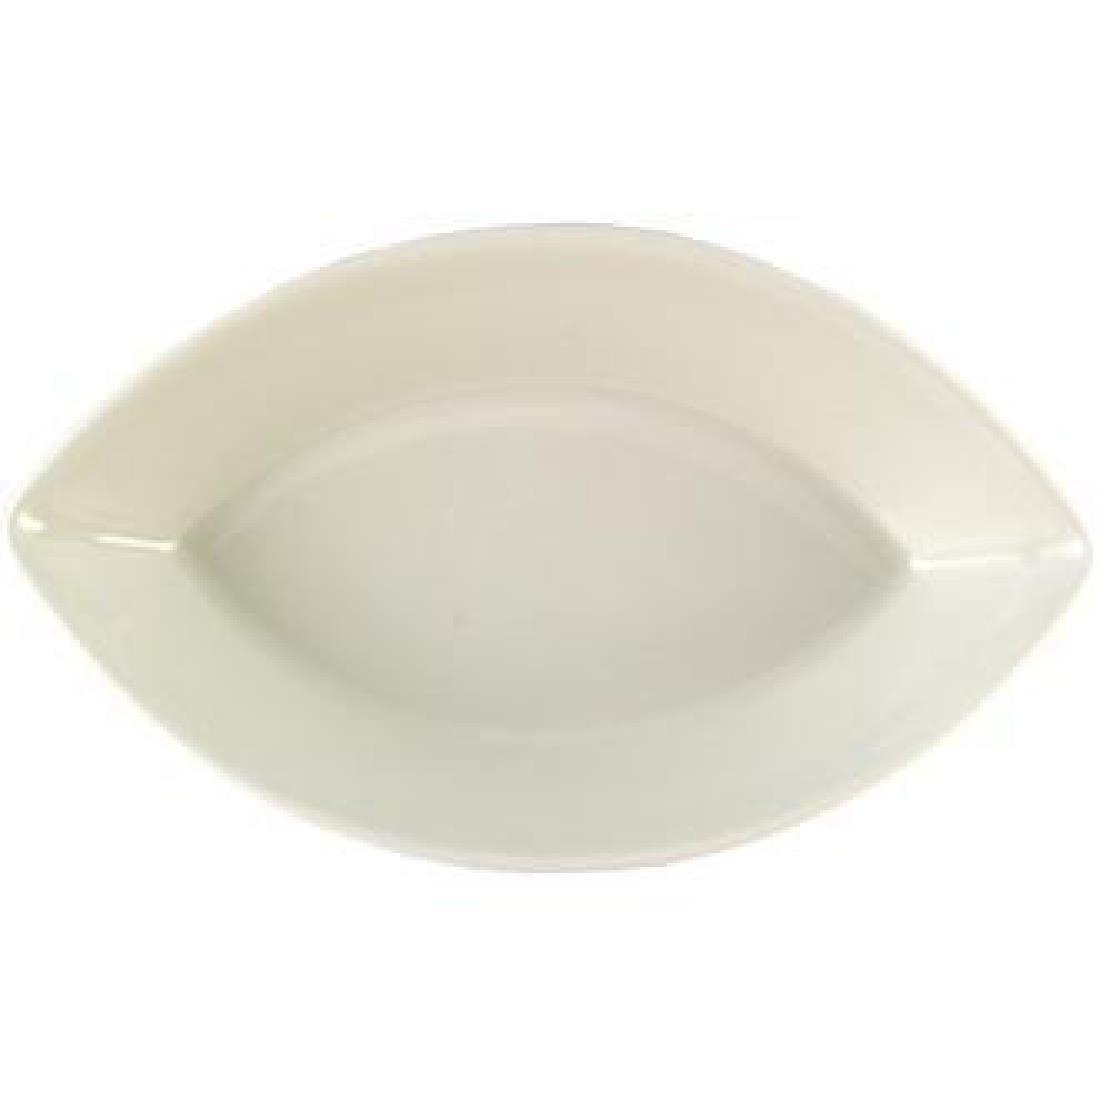 Churchill Voyager Eclipse Dishes White 185mm (Pack of 12) - P440  - 1